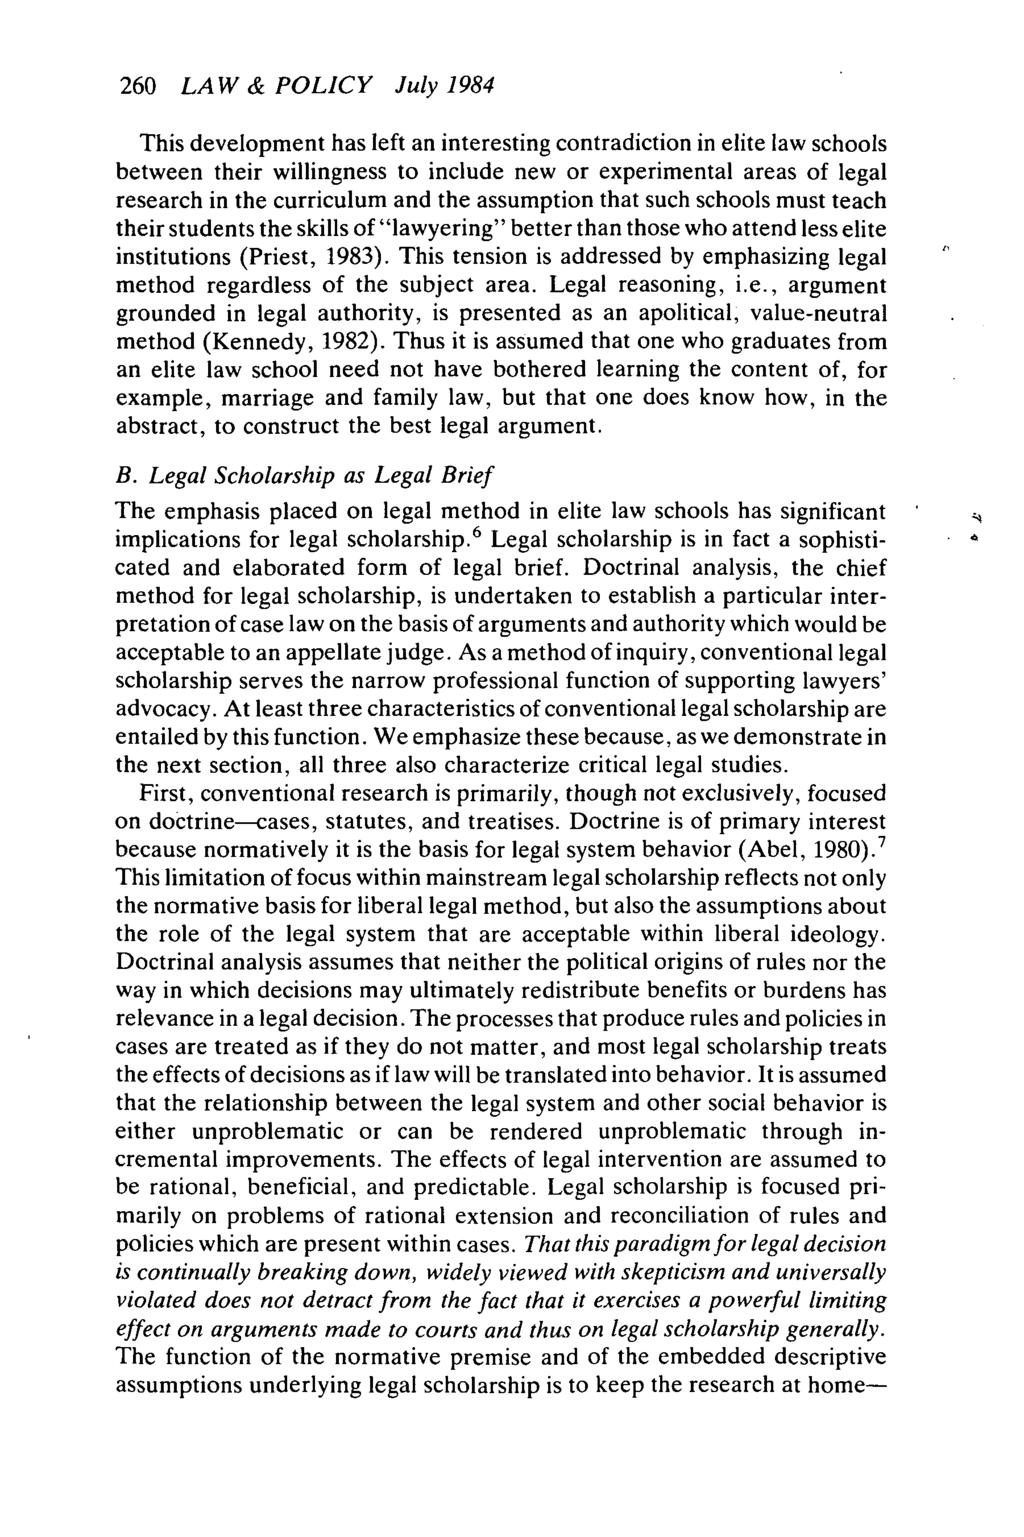 260 LAW & POLICY July 1984 This development has left an interesting contradiction in elite law schools between their wiijingness to include new or experimental areas of legal research in the